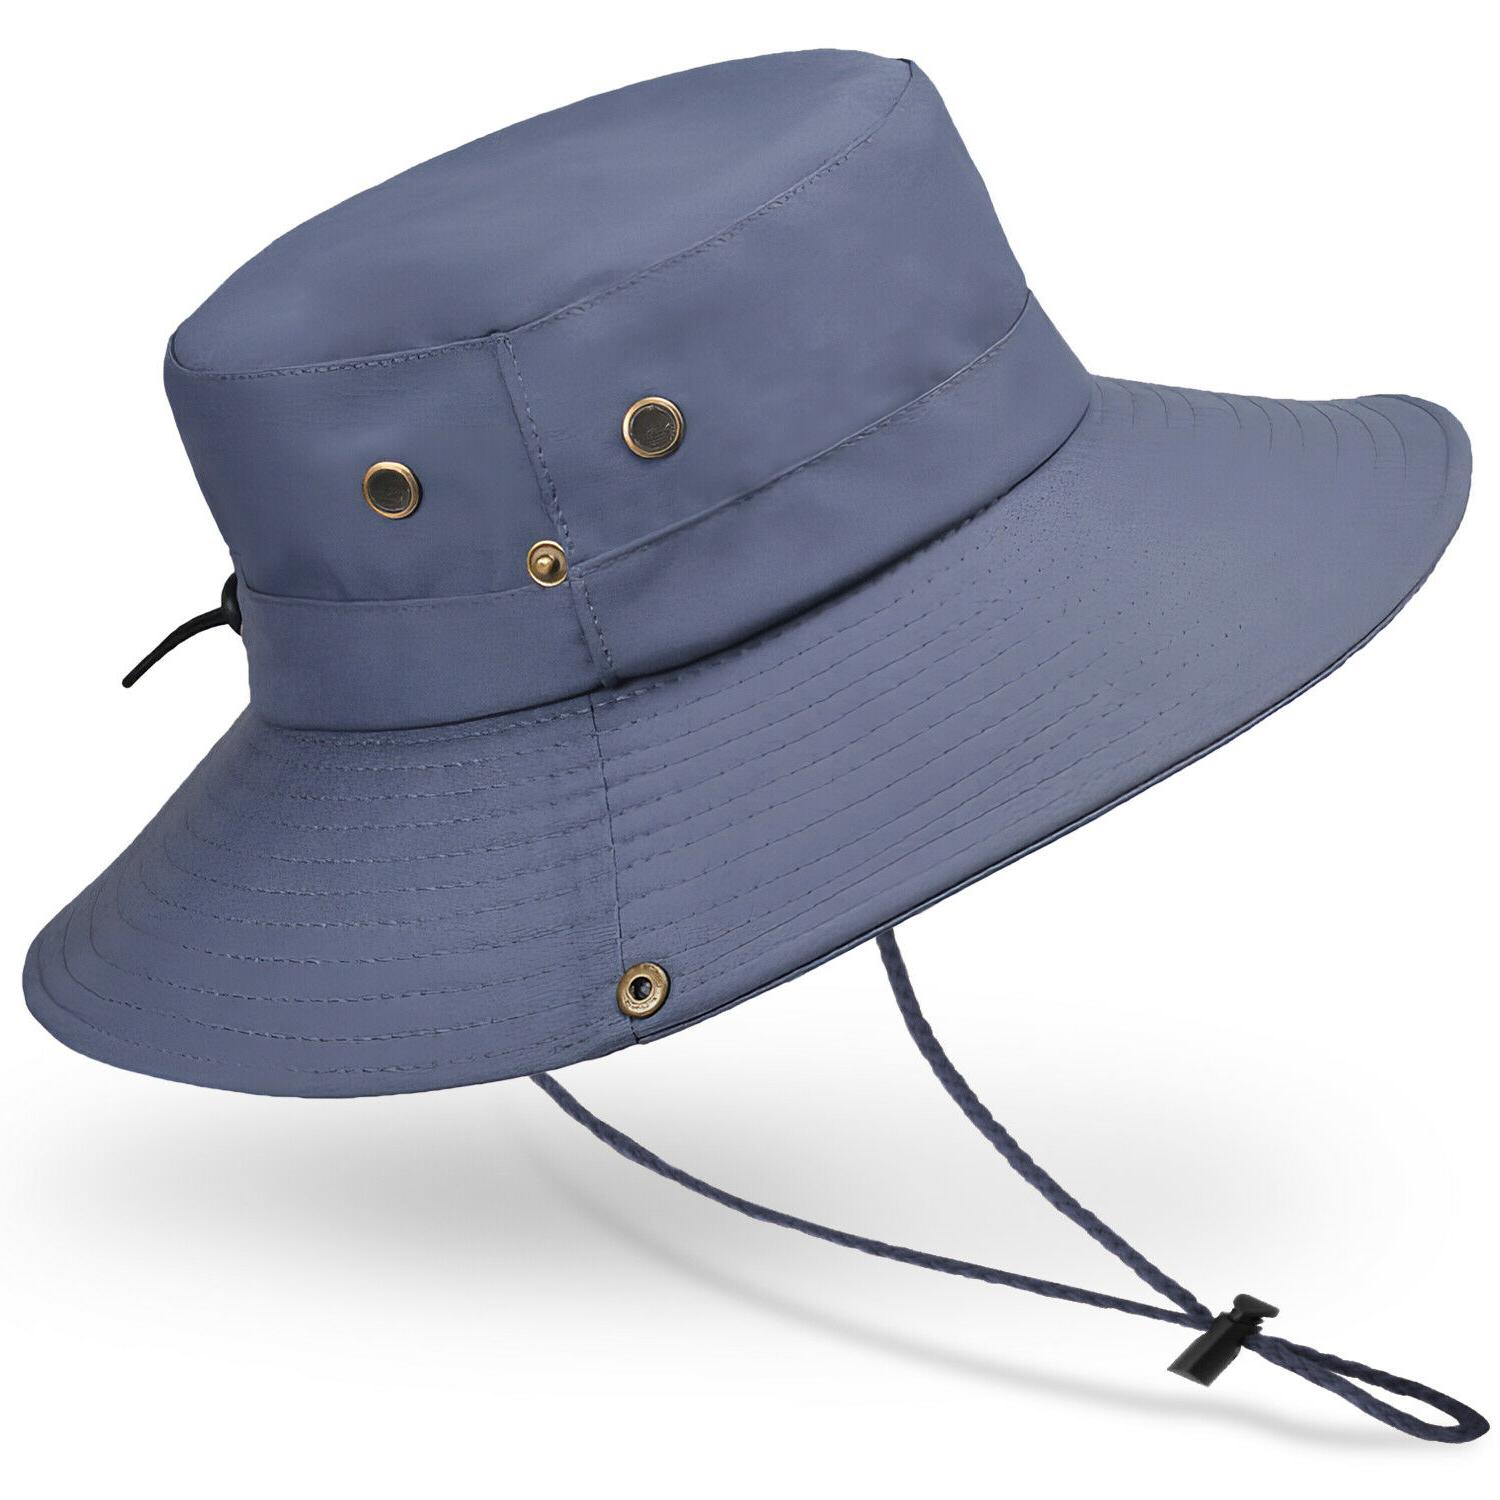 Things to Consider When Buying a Fishing Hat for Ultimate Comfort